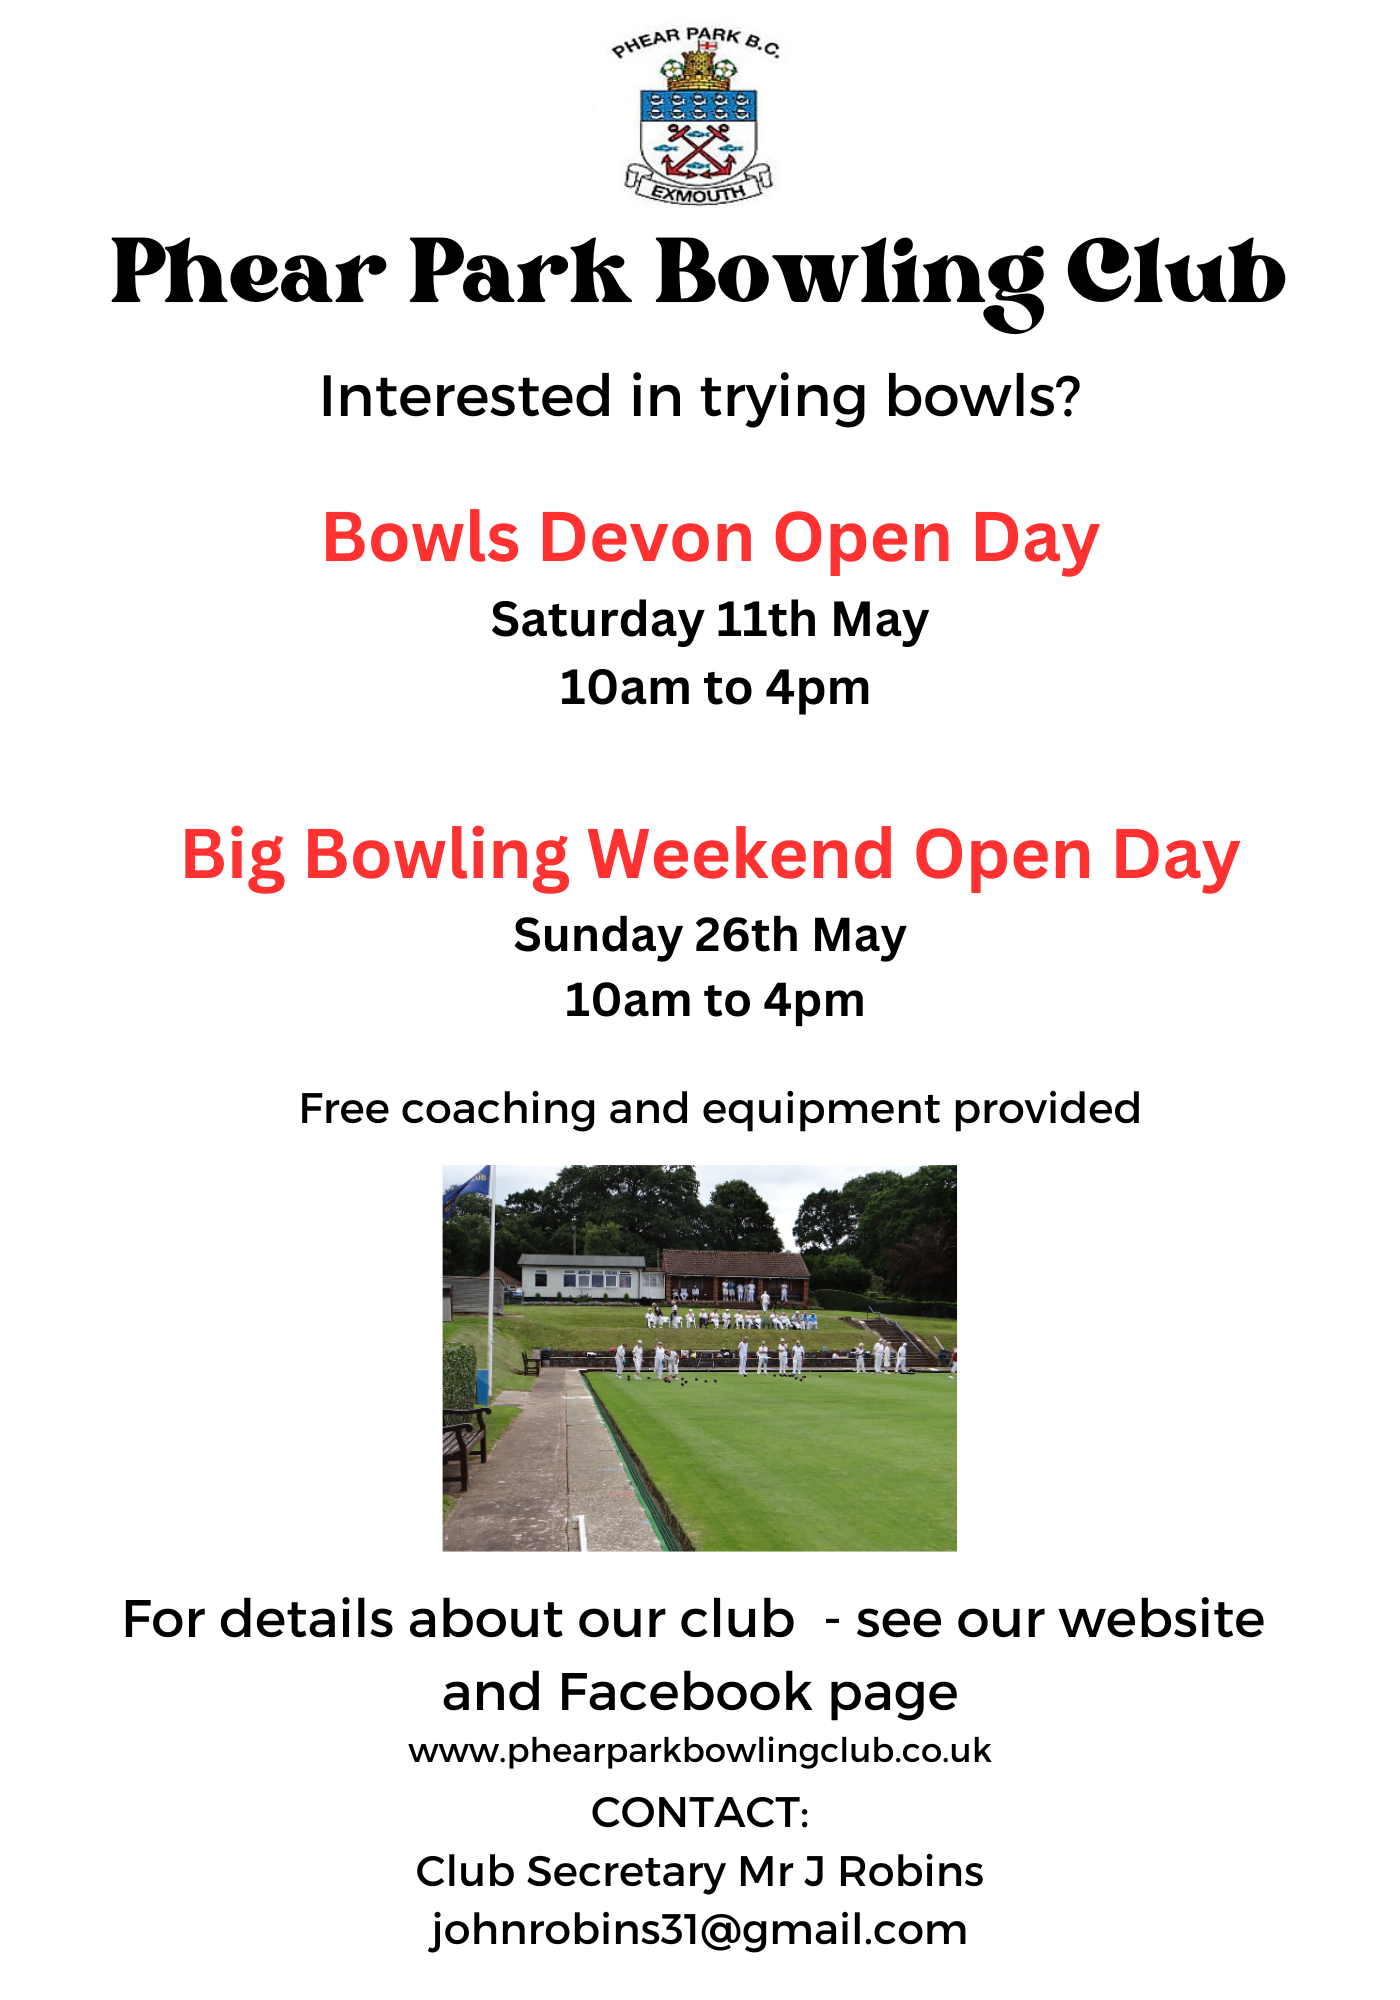 Copy of PPBC - Bowls Devon and Big Bowls Weekend Open Days Poster(1)